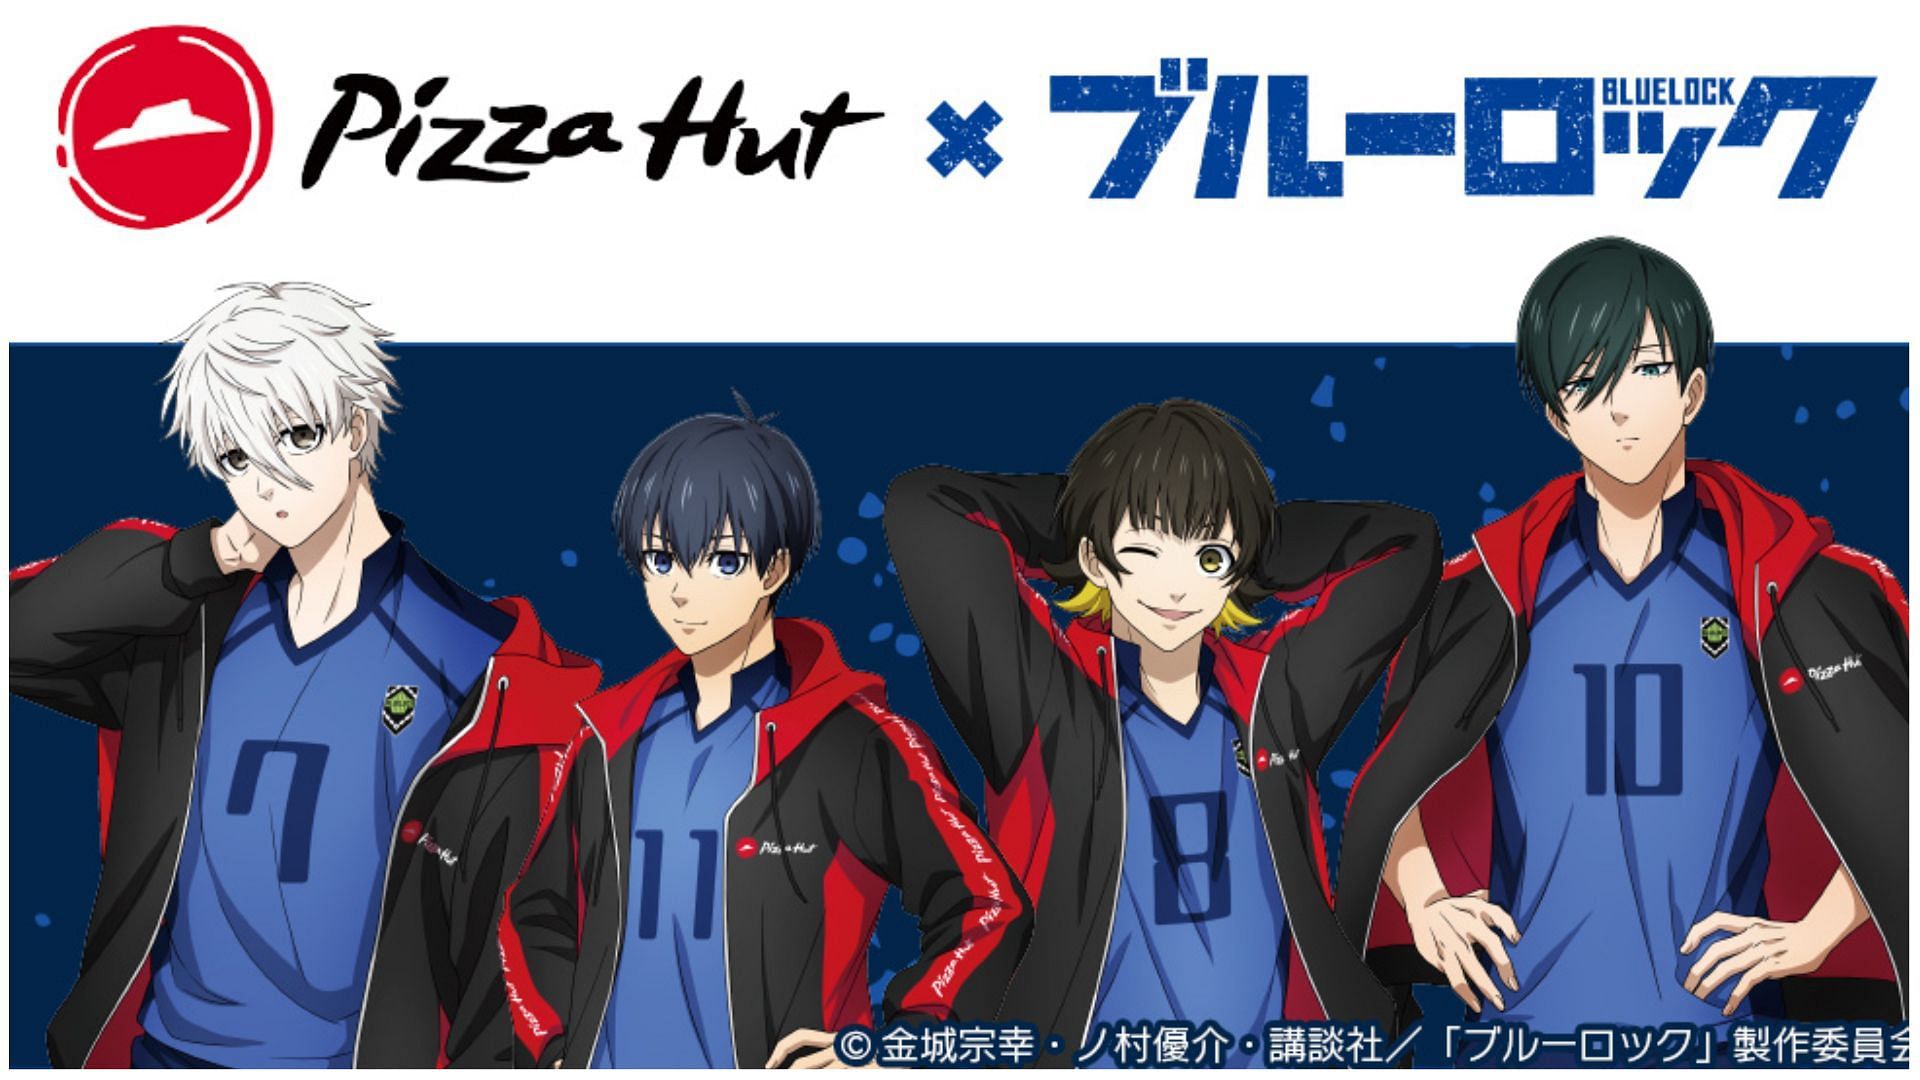 Blue Lock X Pizza Hut collaboration entices anime lovers and